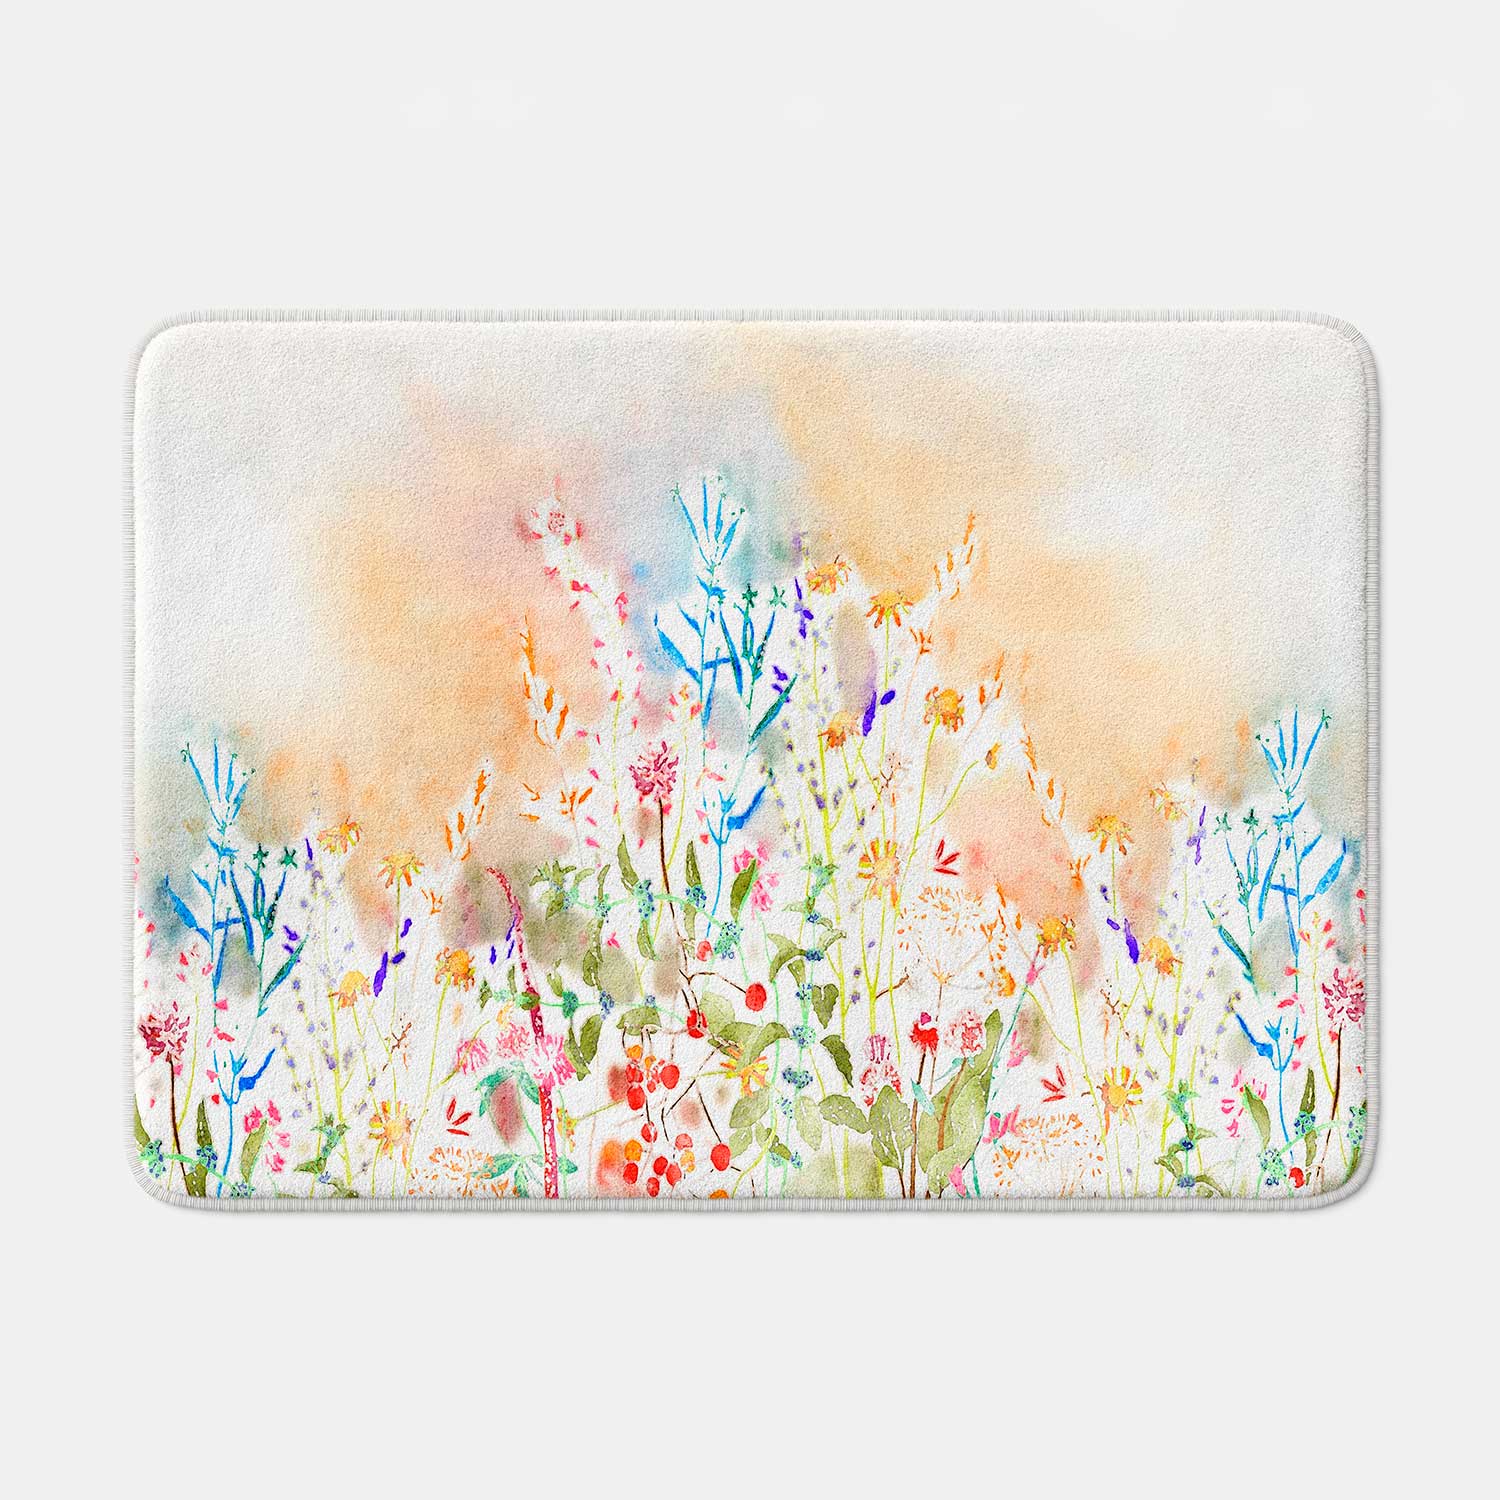 https://www.ozscapedesigns.com/wp-content/uploads/2023/02/watercolor-wildflower-floral-bathroom-rug.jpg